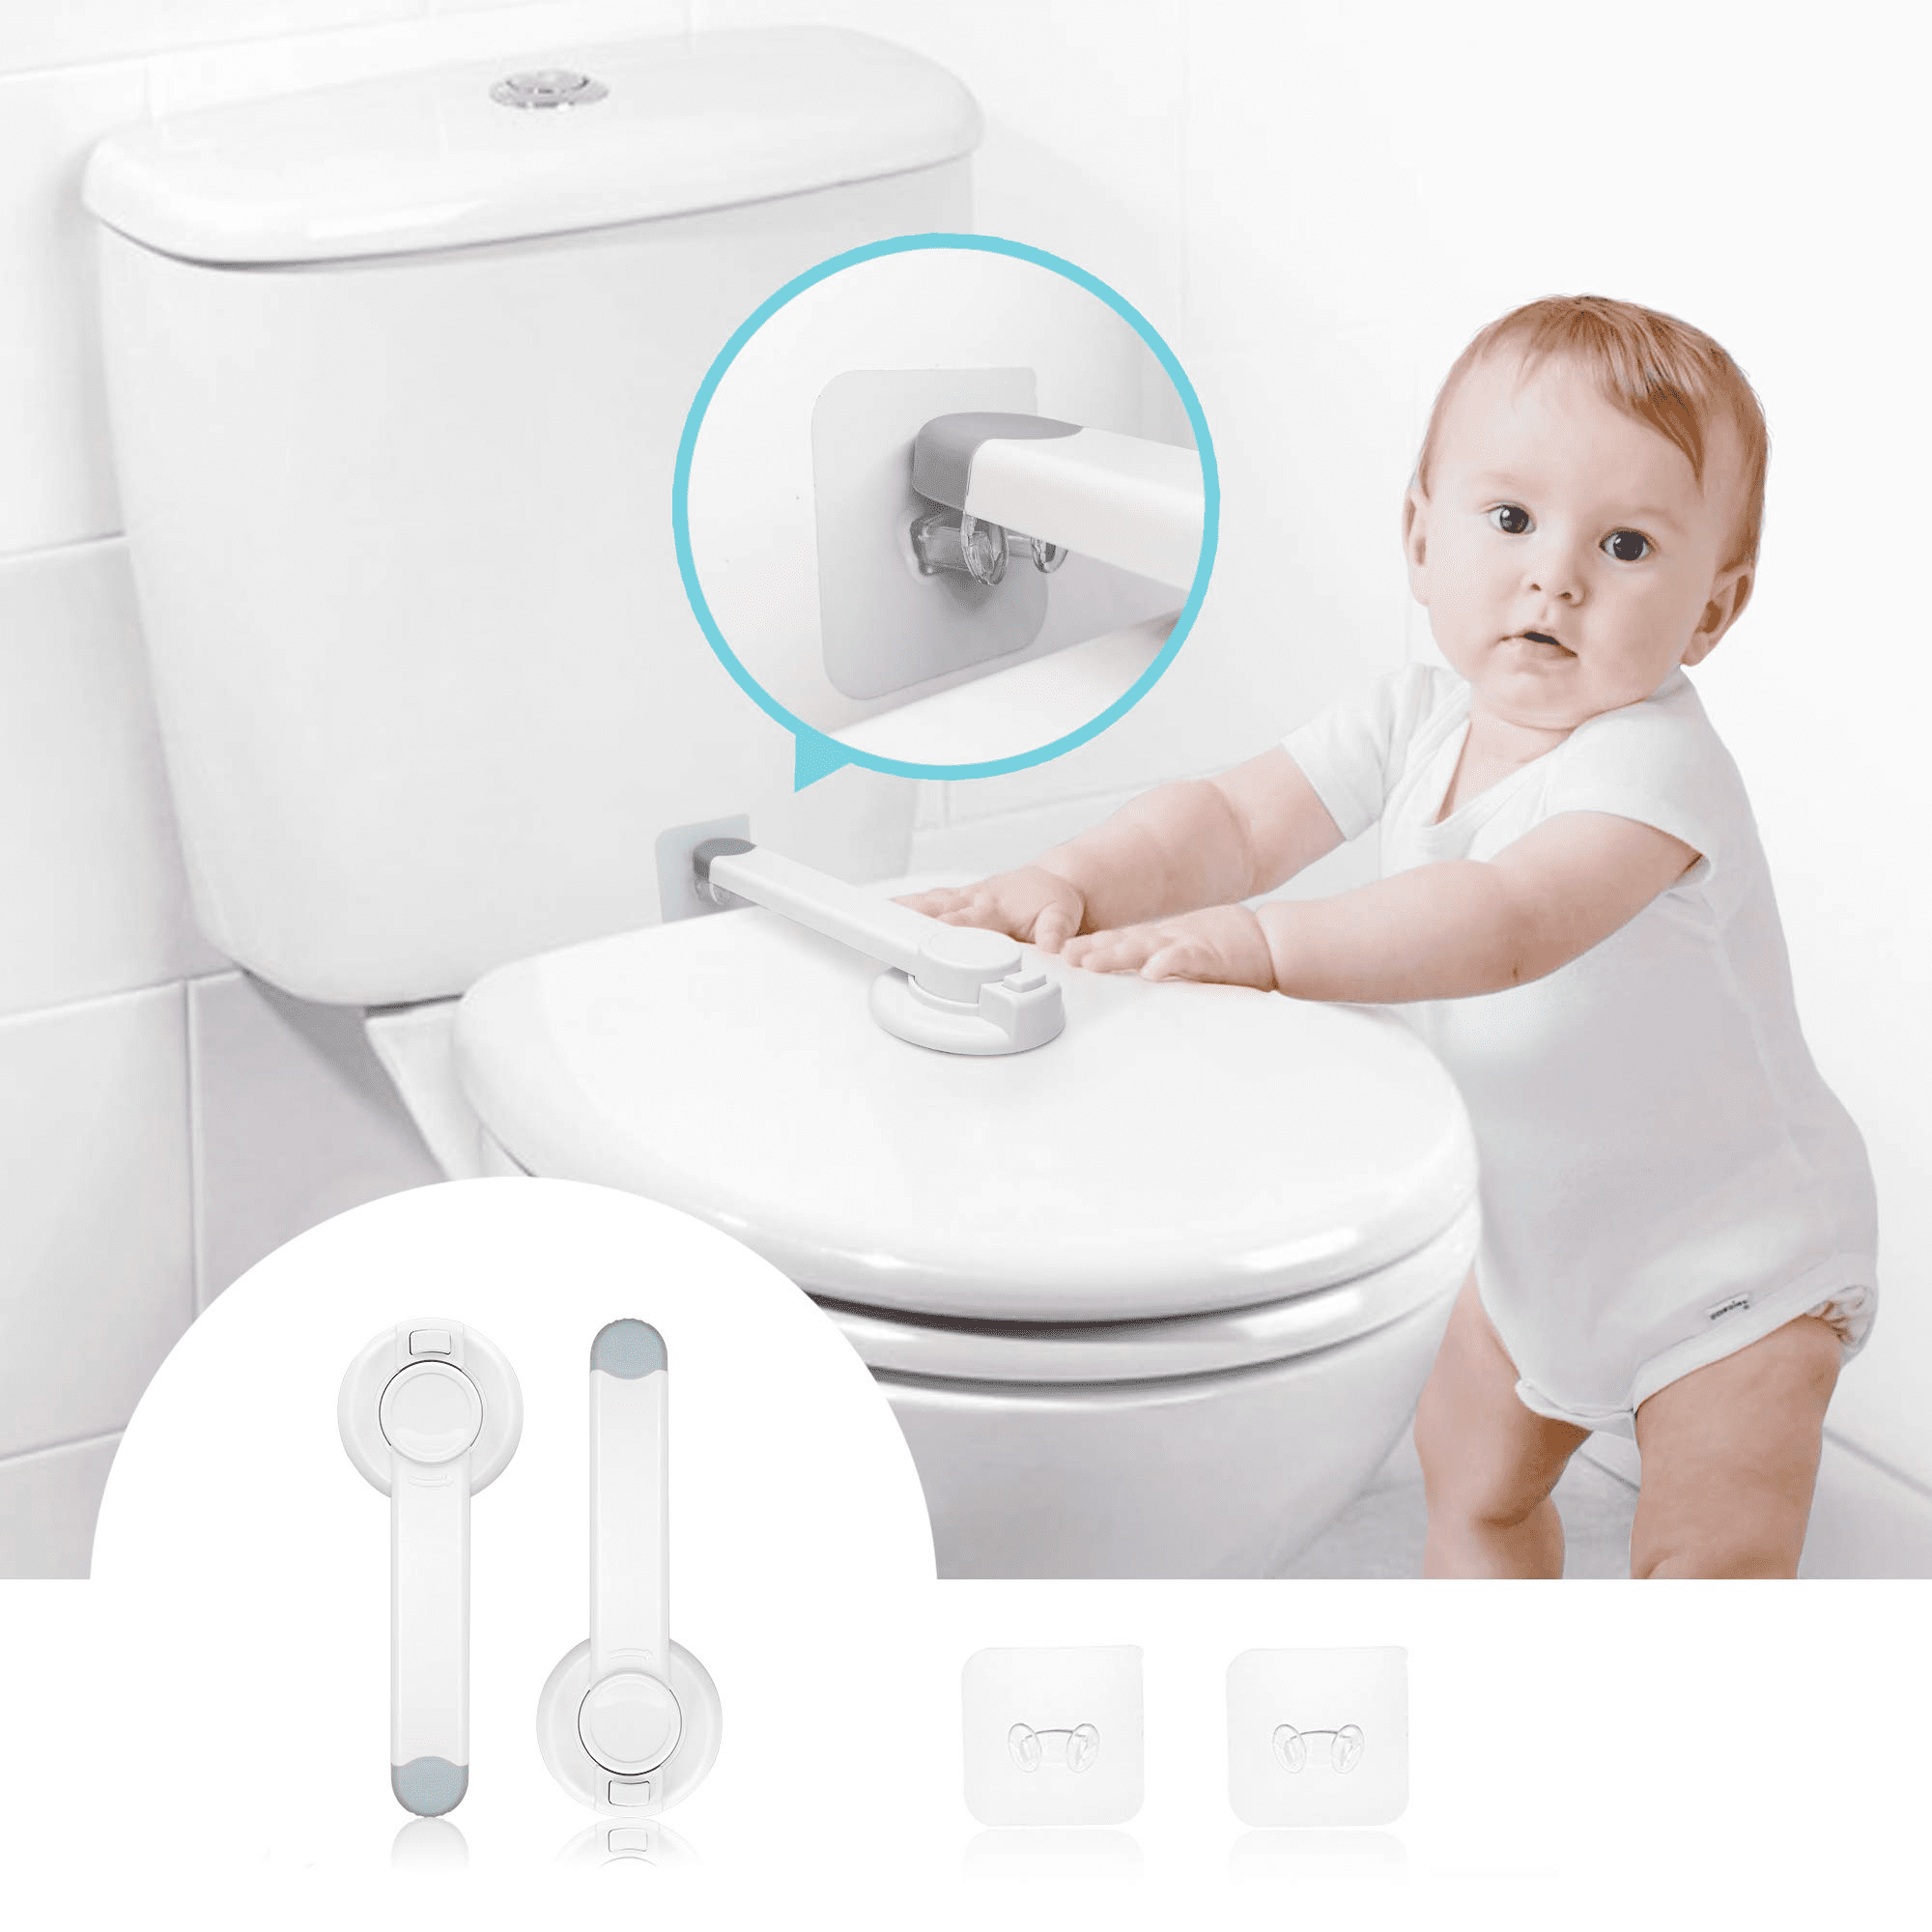 2 packs Baby Toilet Locks Professional Top Safety Toilet Seat Locks No Tools Needed Easy Installation Baby Safety Proof Toilet Lid Lock with Arm Adhesive Mount